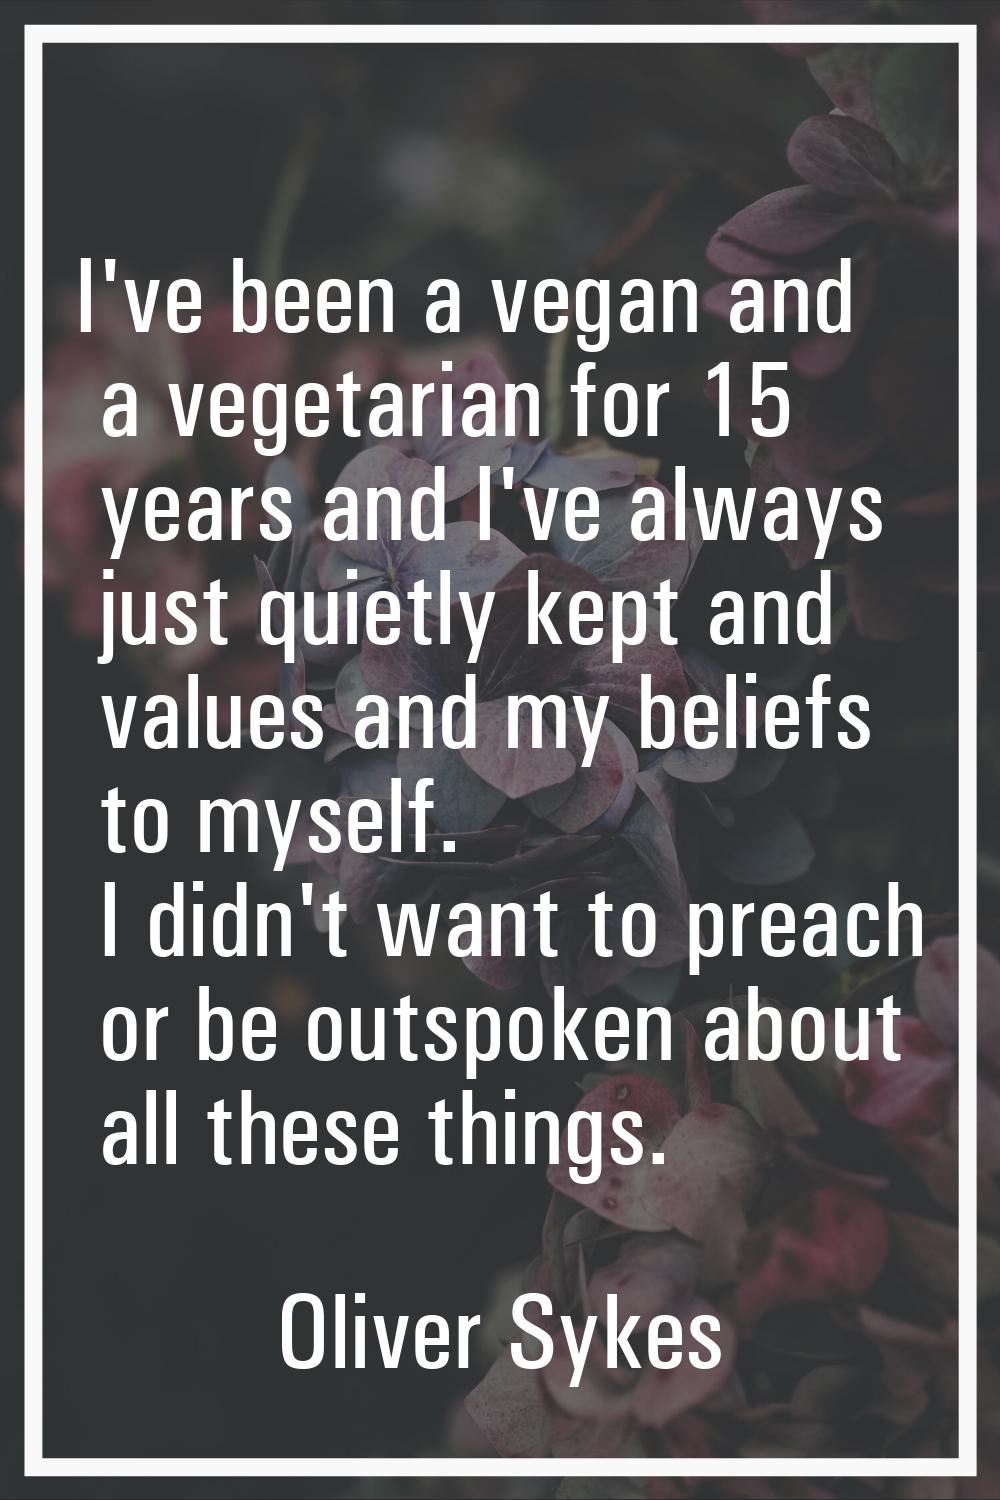 I've been a vegan and a vegetarian for 15 years and I've always just quietly kept and values and my